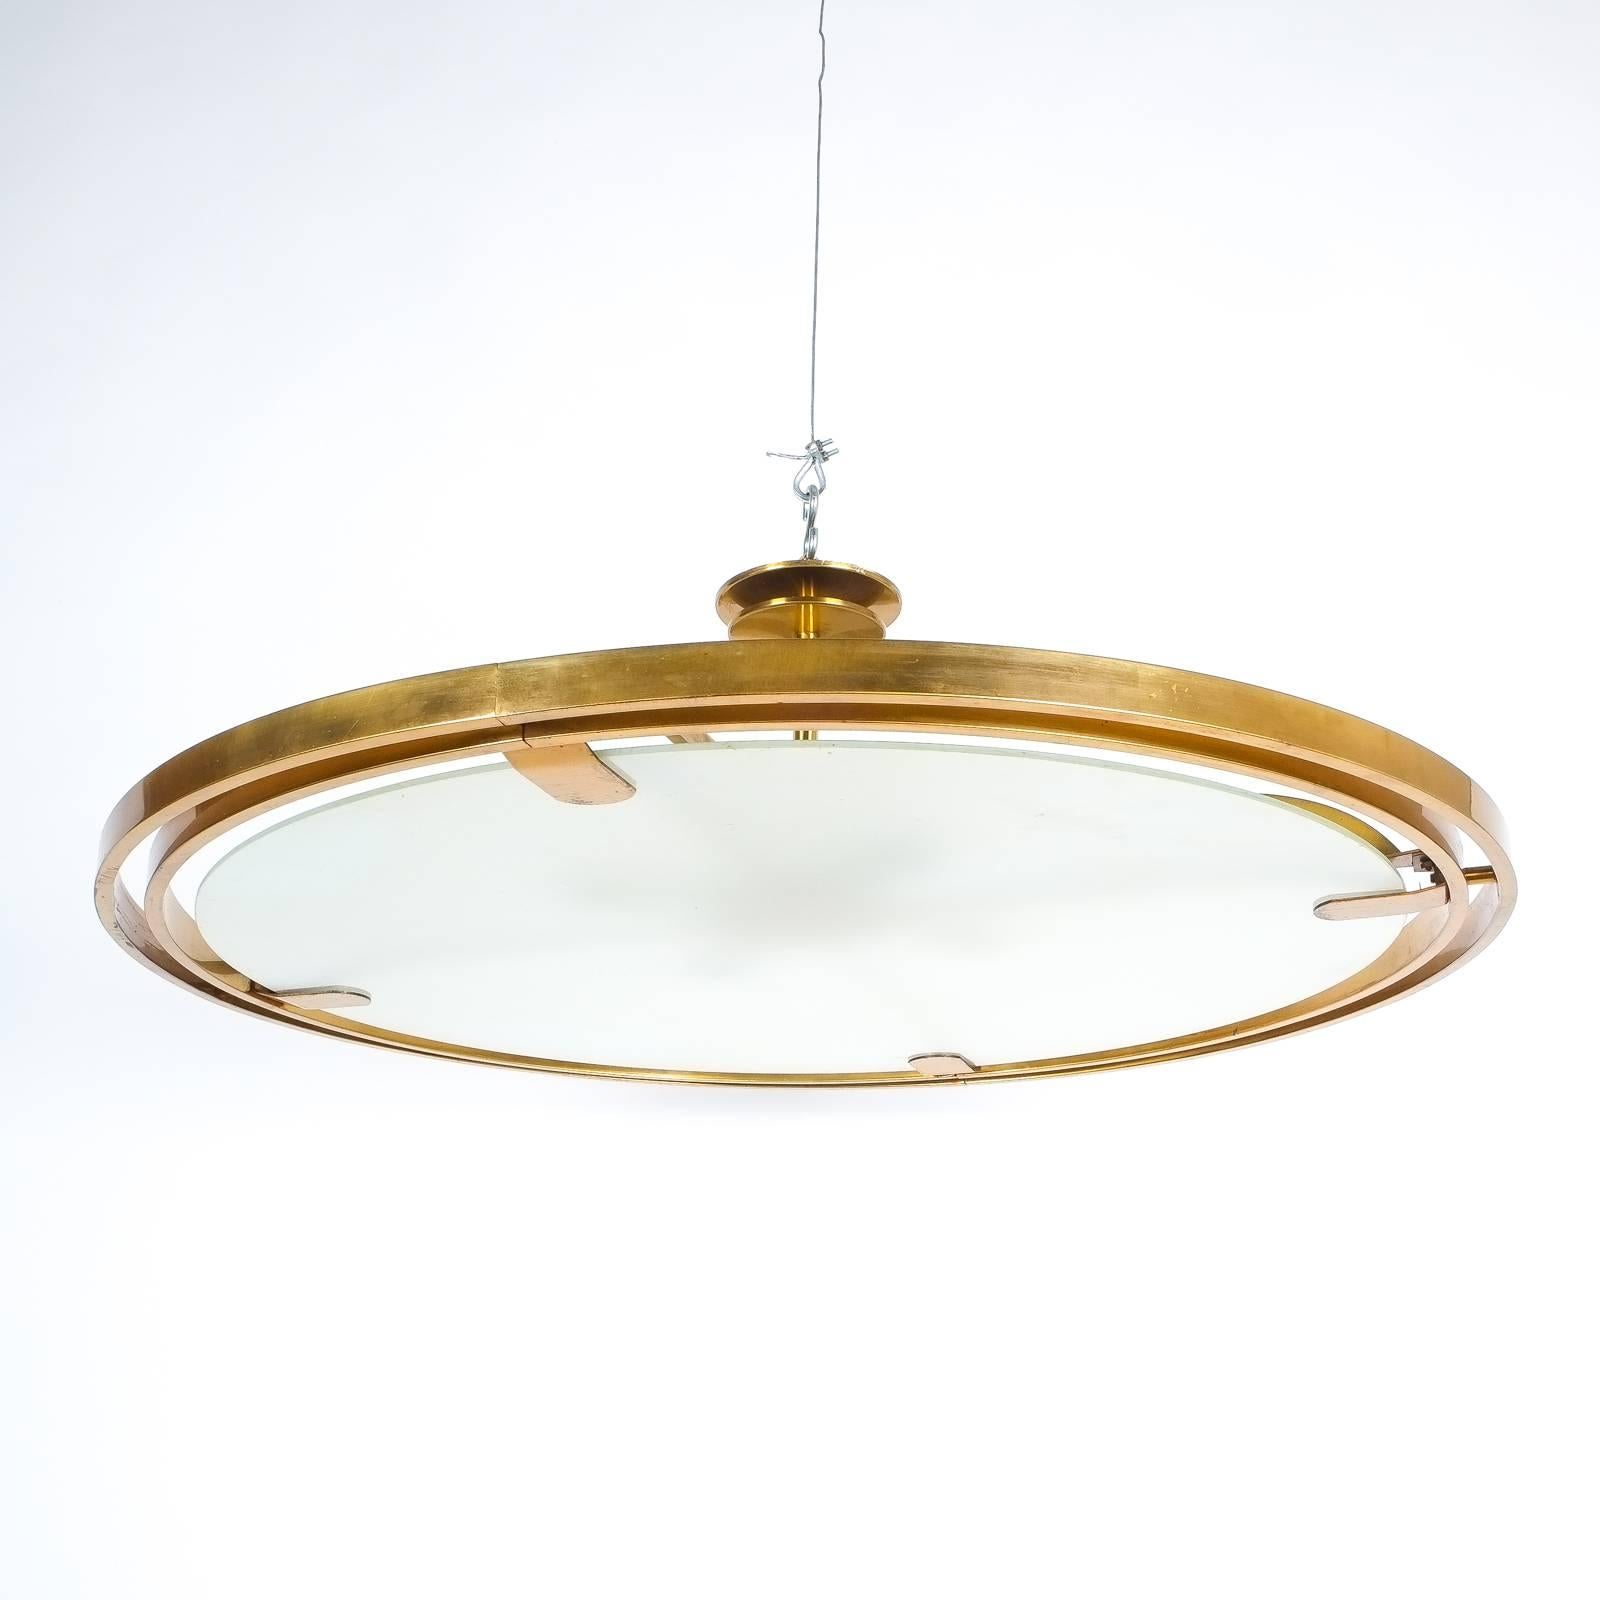 French Art Deco Brass Satin Glass Graphical Ceiling Lamp Flush Mount UFO, circa 1920